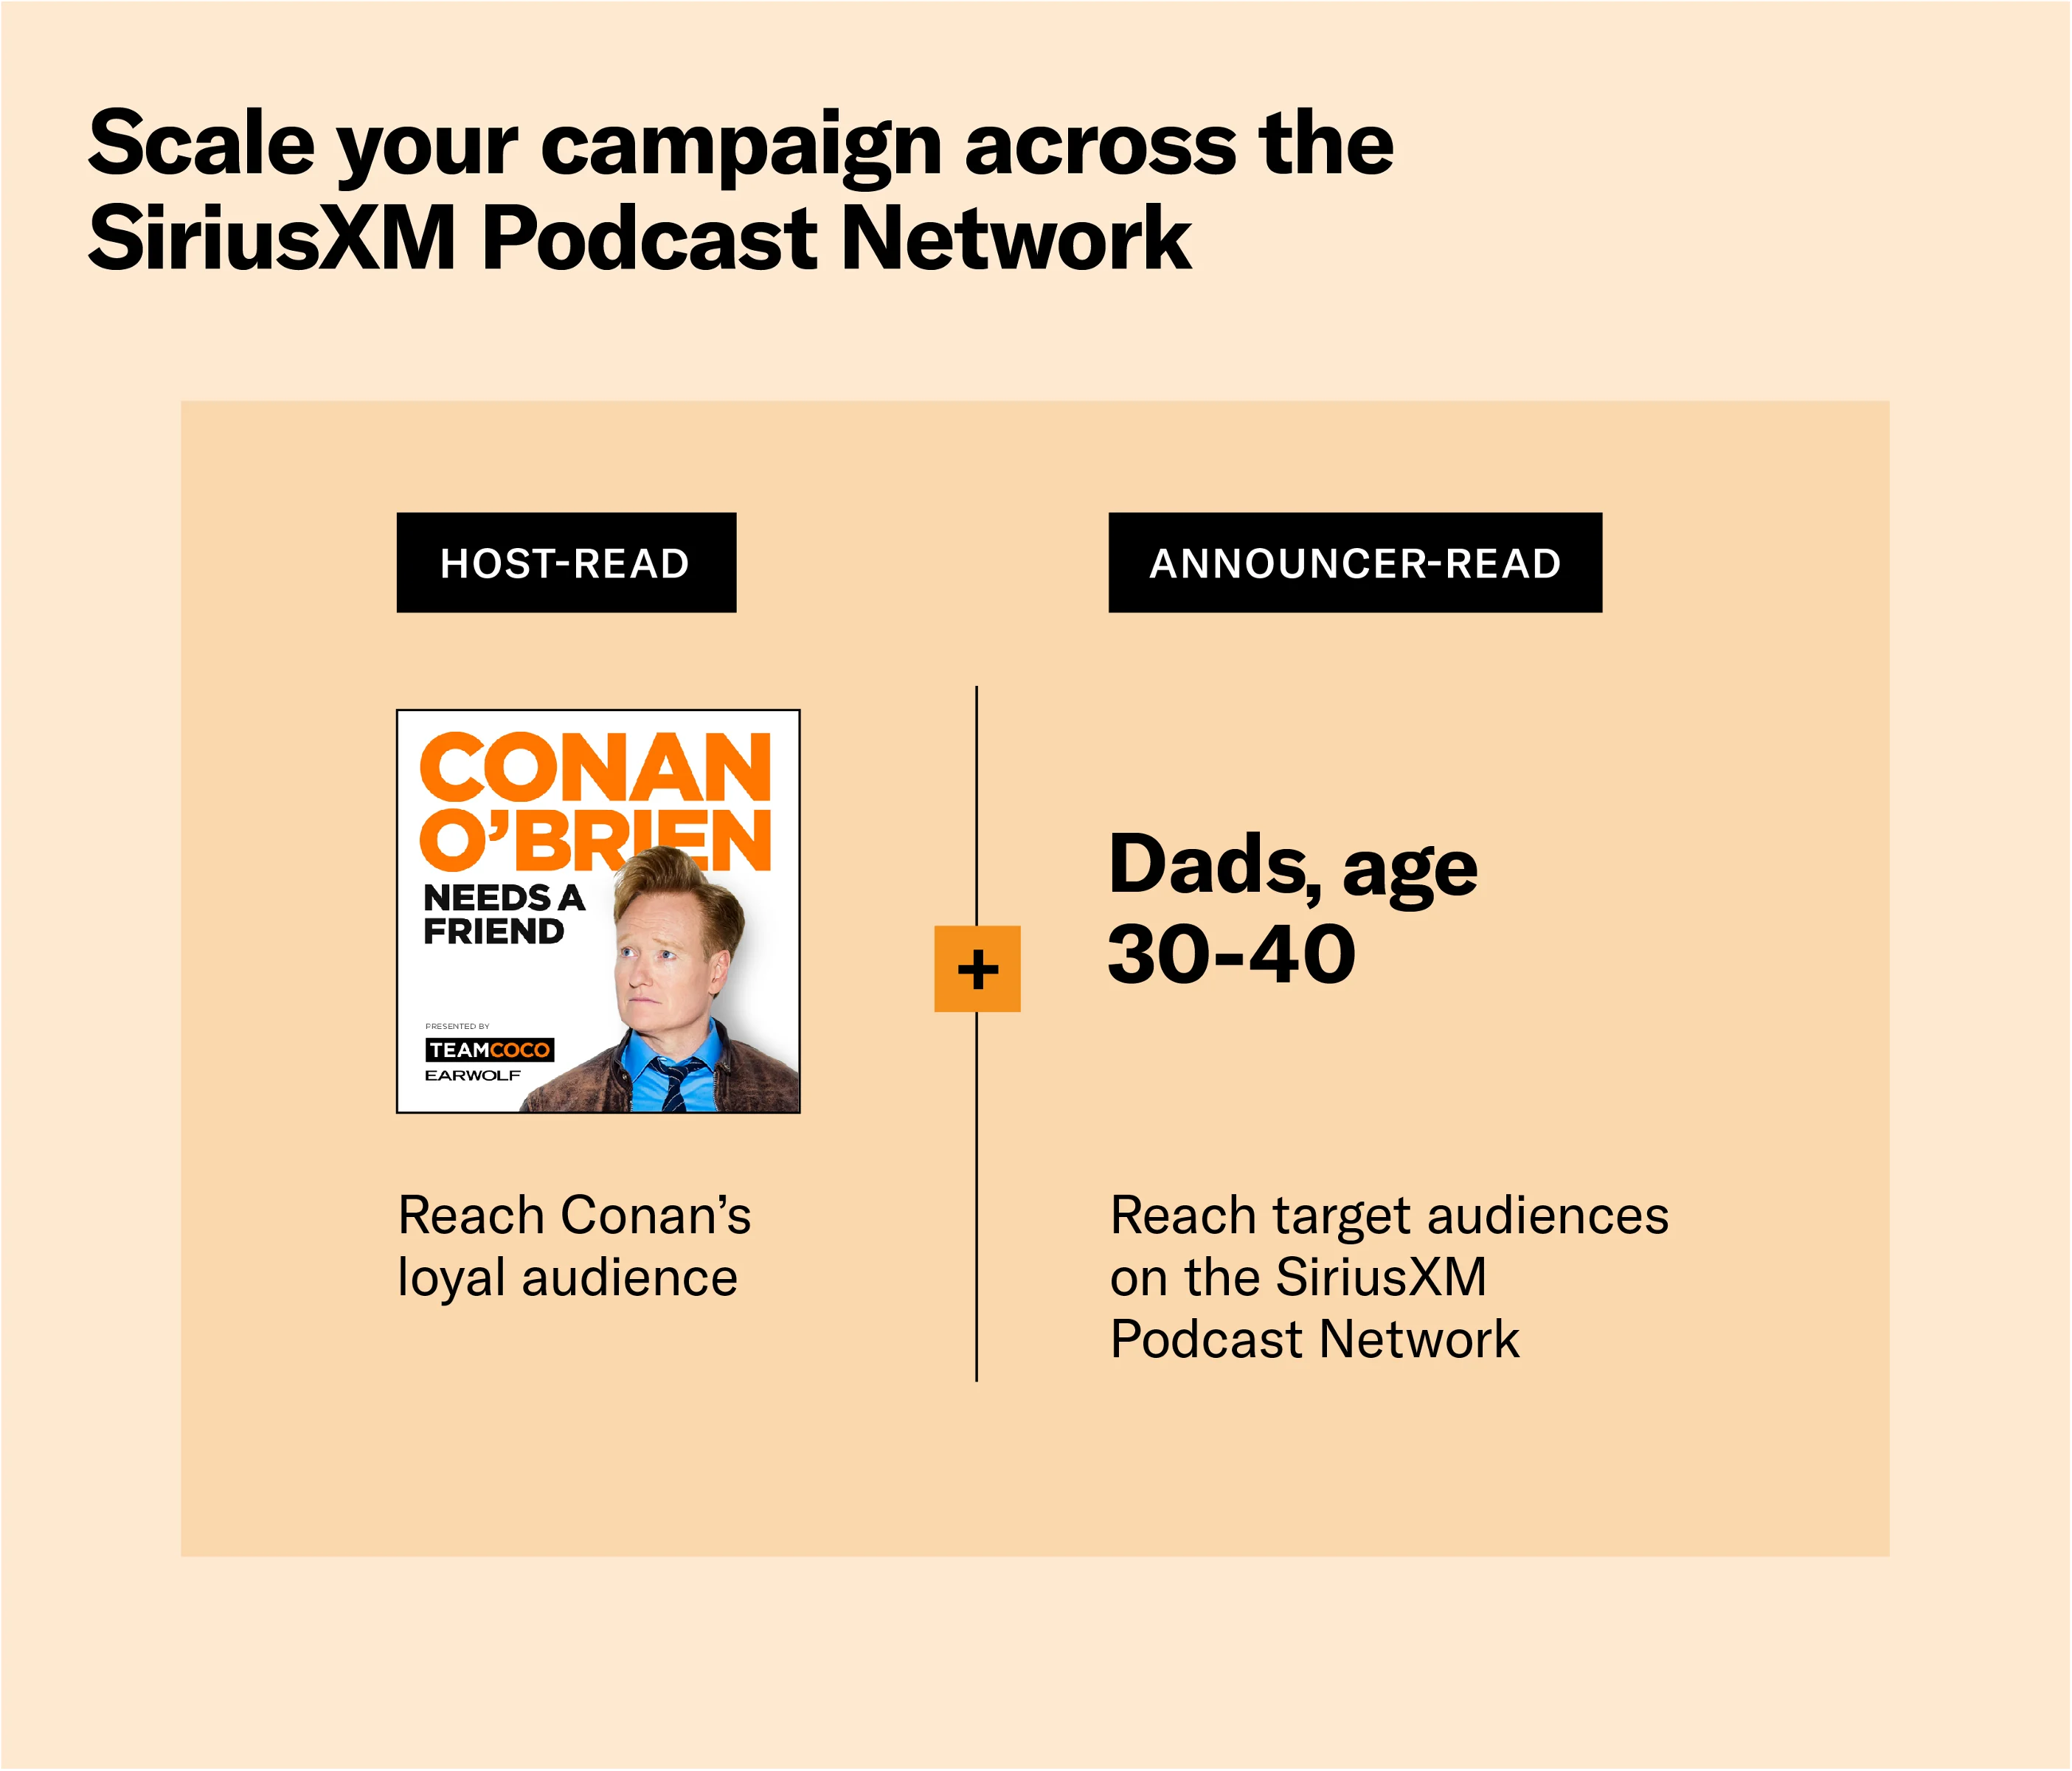 Scale your podcast campaign with announcer-read ads